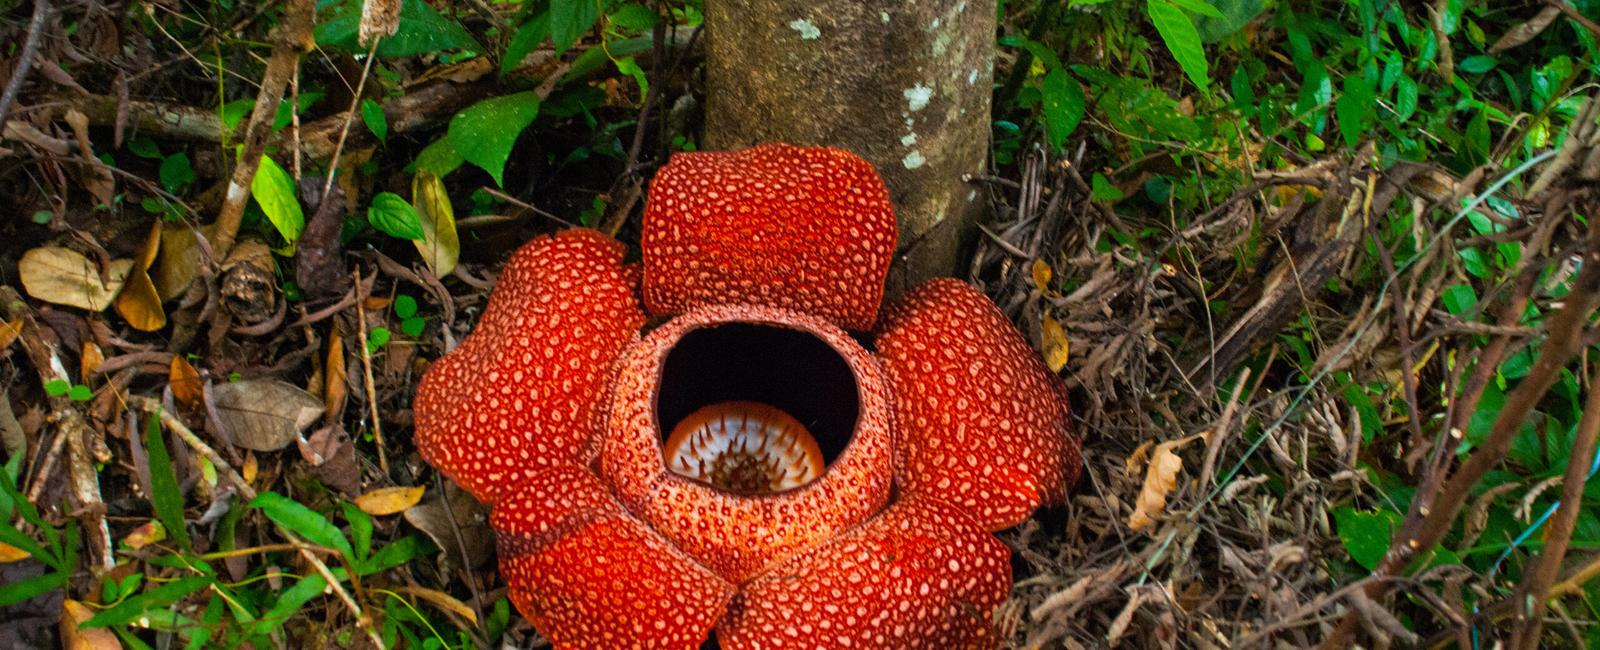 The largest individual flower on earth is from a plant called rafflesia arnoldii its flowers reach up to 1 meter 3 feet in diameter and weigh around 10kg